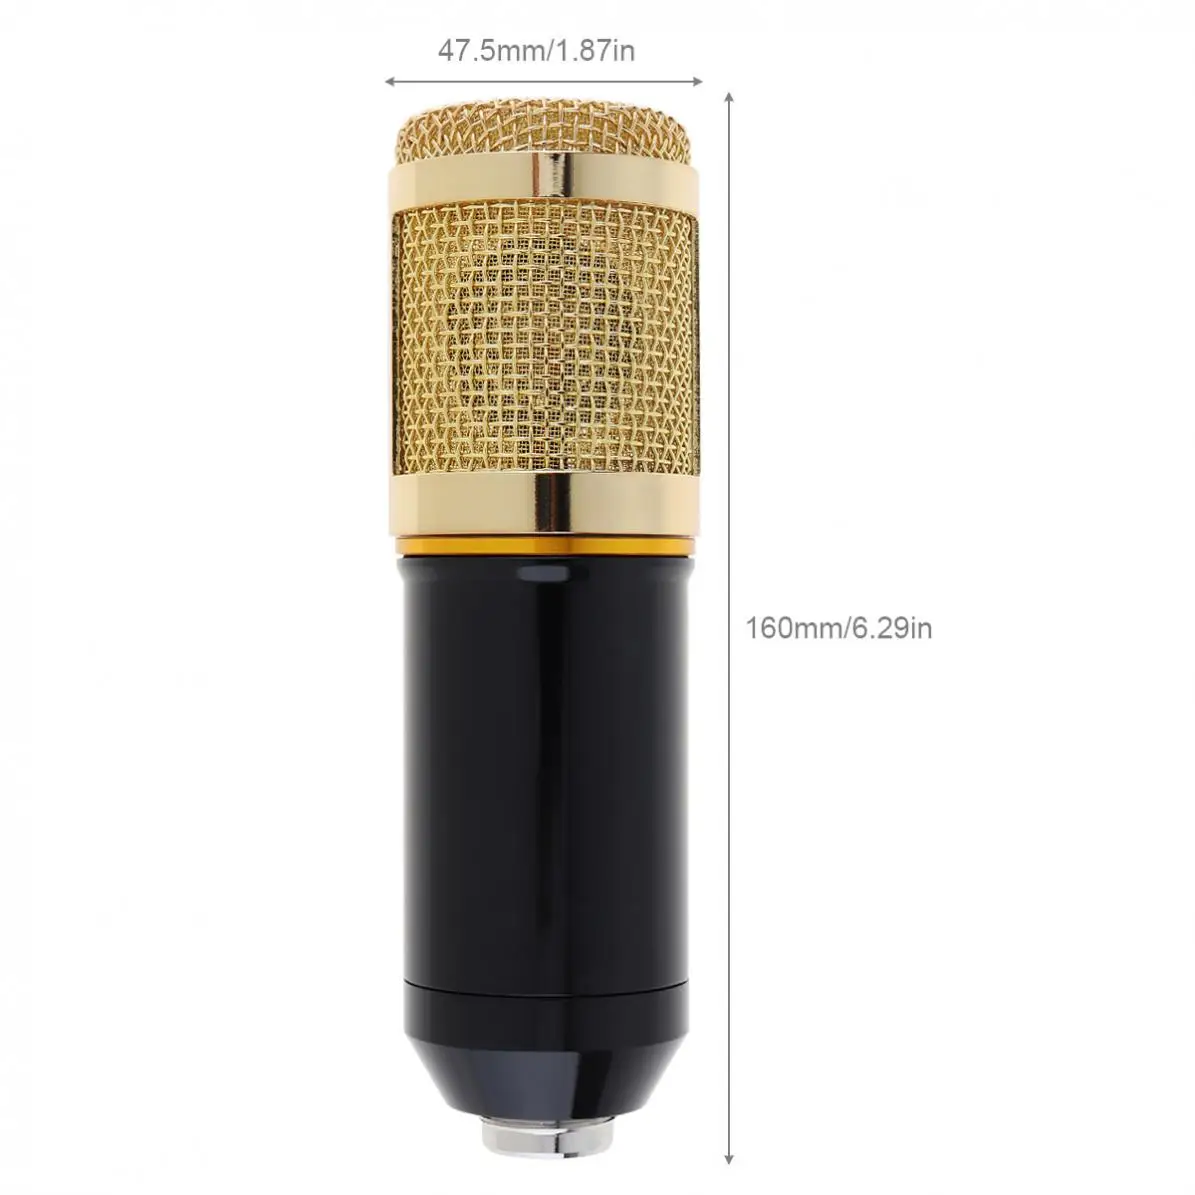 BM-800 Professional Condenser Microphone Live Microphone with Phantom Power Supply Karaoke Condenser Microphone Suit Kits enlarge